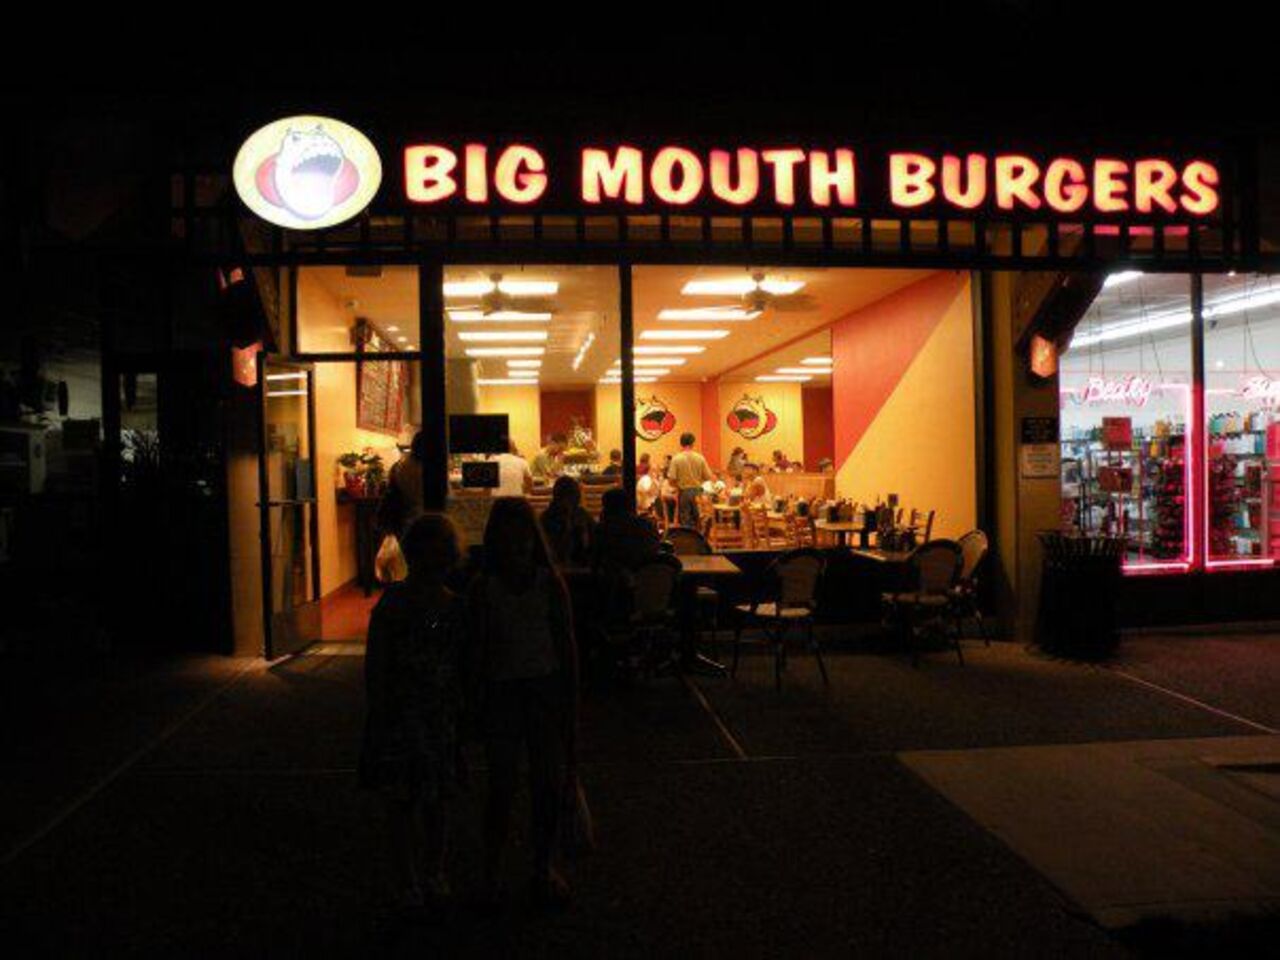 A photo of Big Mouth Burgers